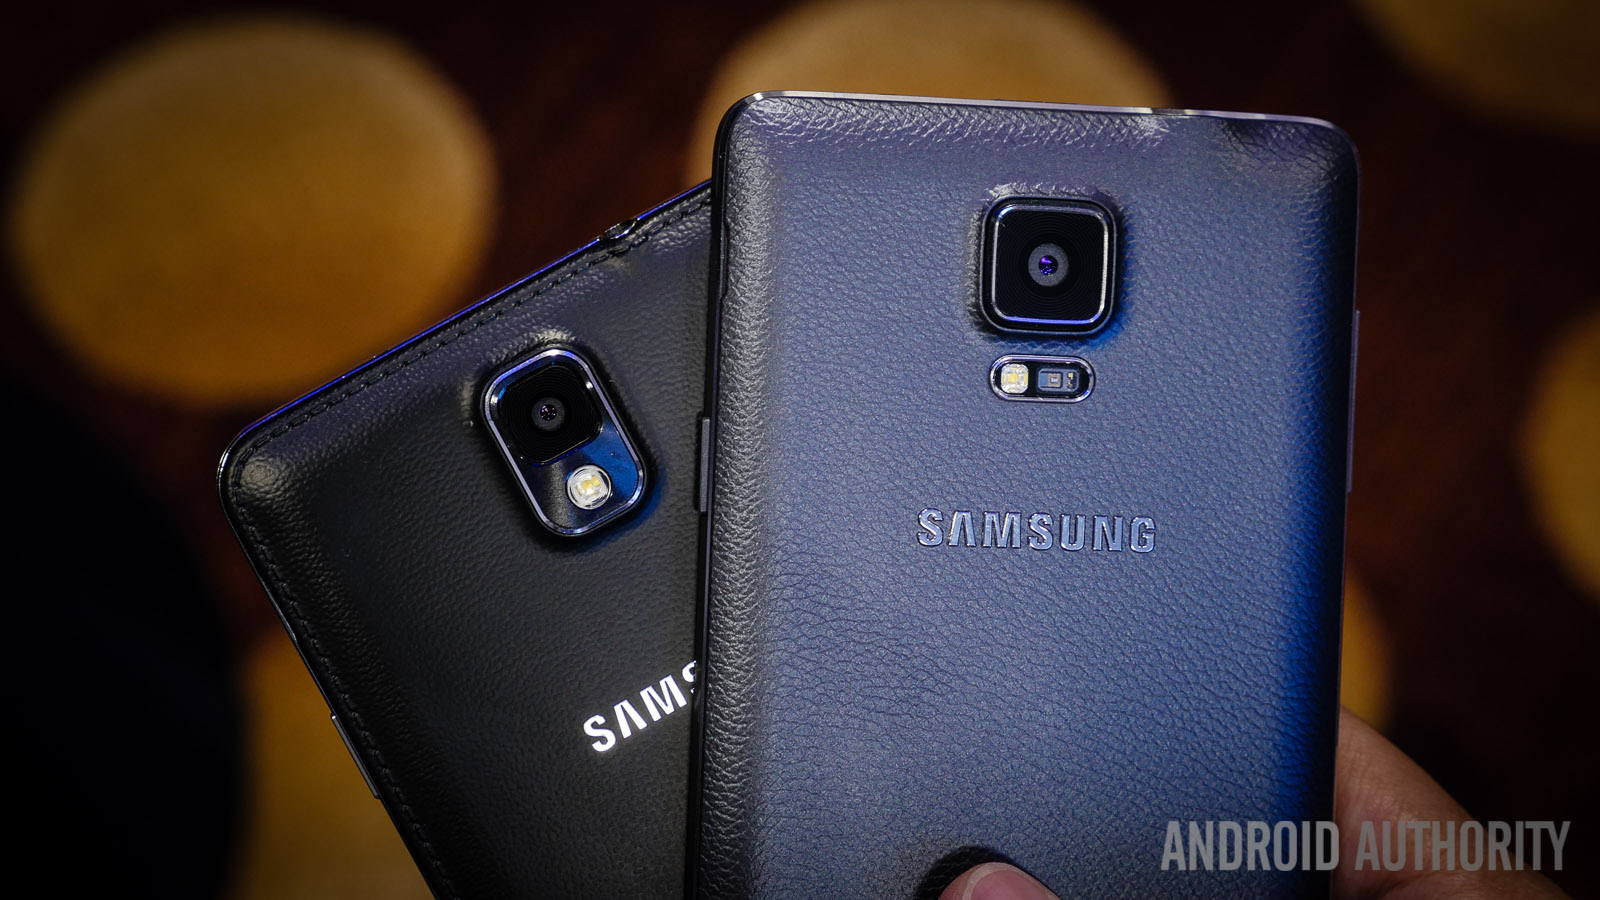 samsung galaxy note 4 vs note 3 quick look aa (8 of 11)